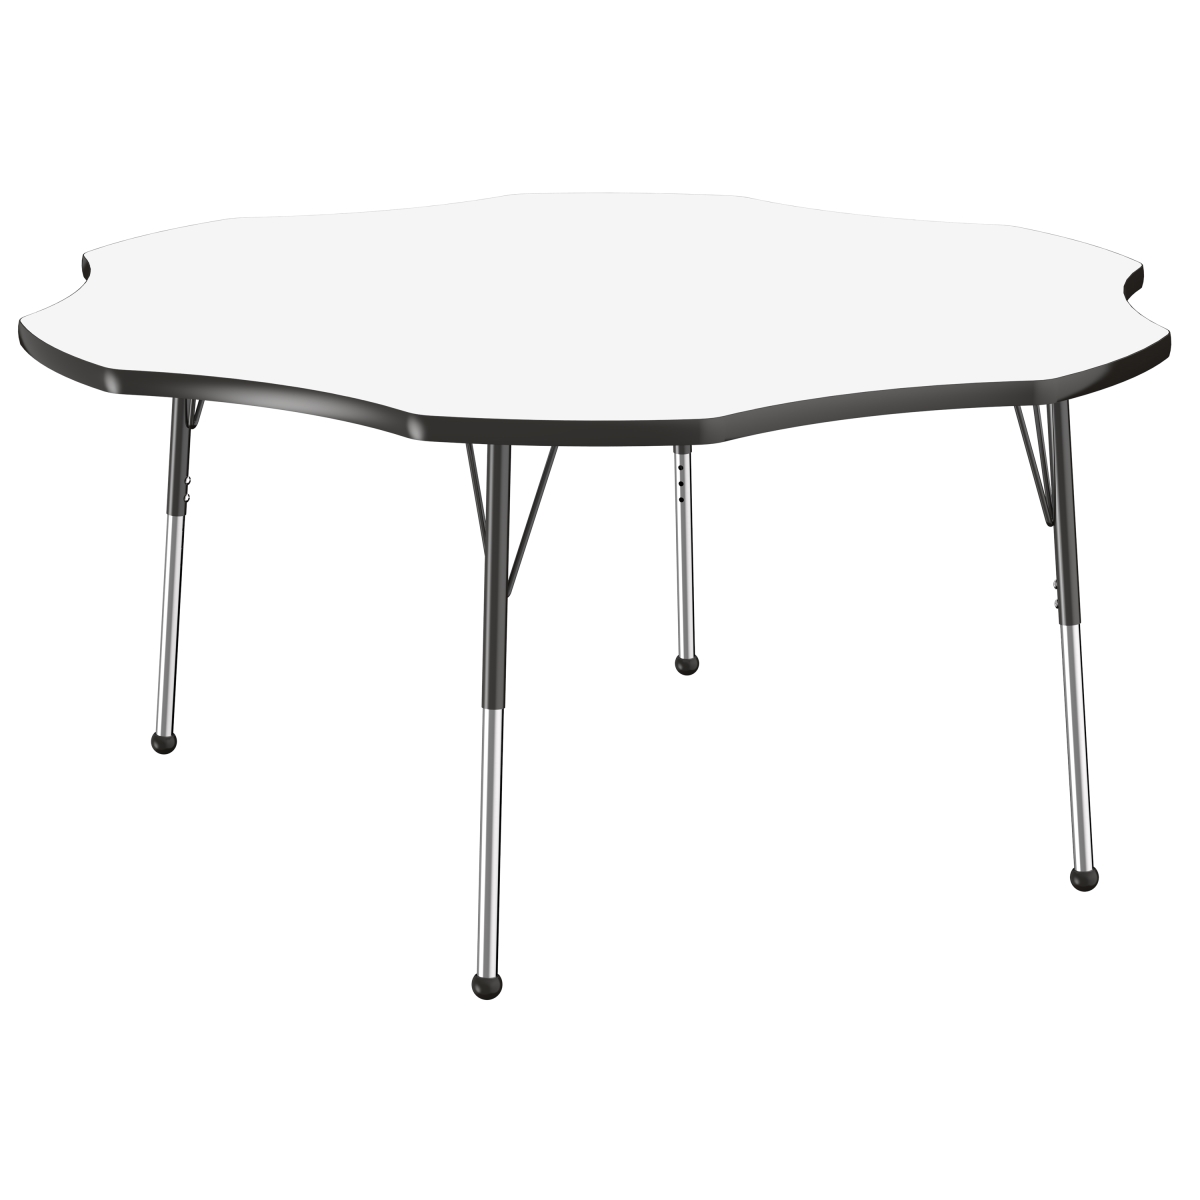 10242-debk 60 In. Flower Dry-erase Adjustable Activity Table With Standard Ball - Black